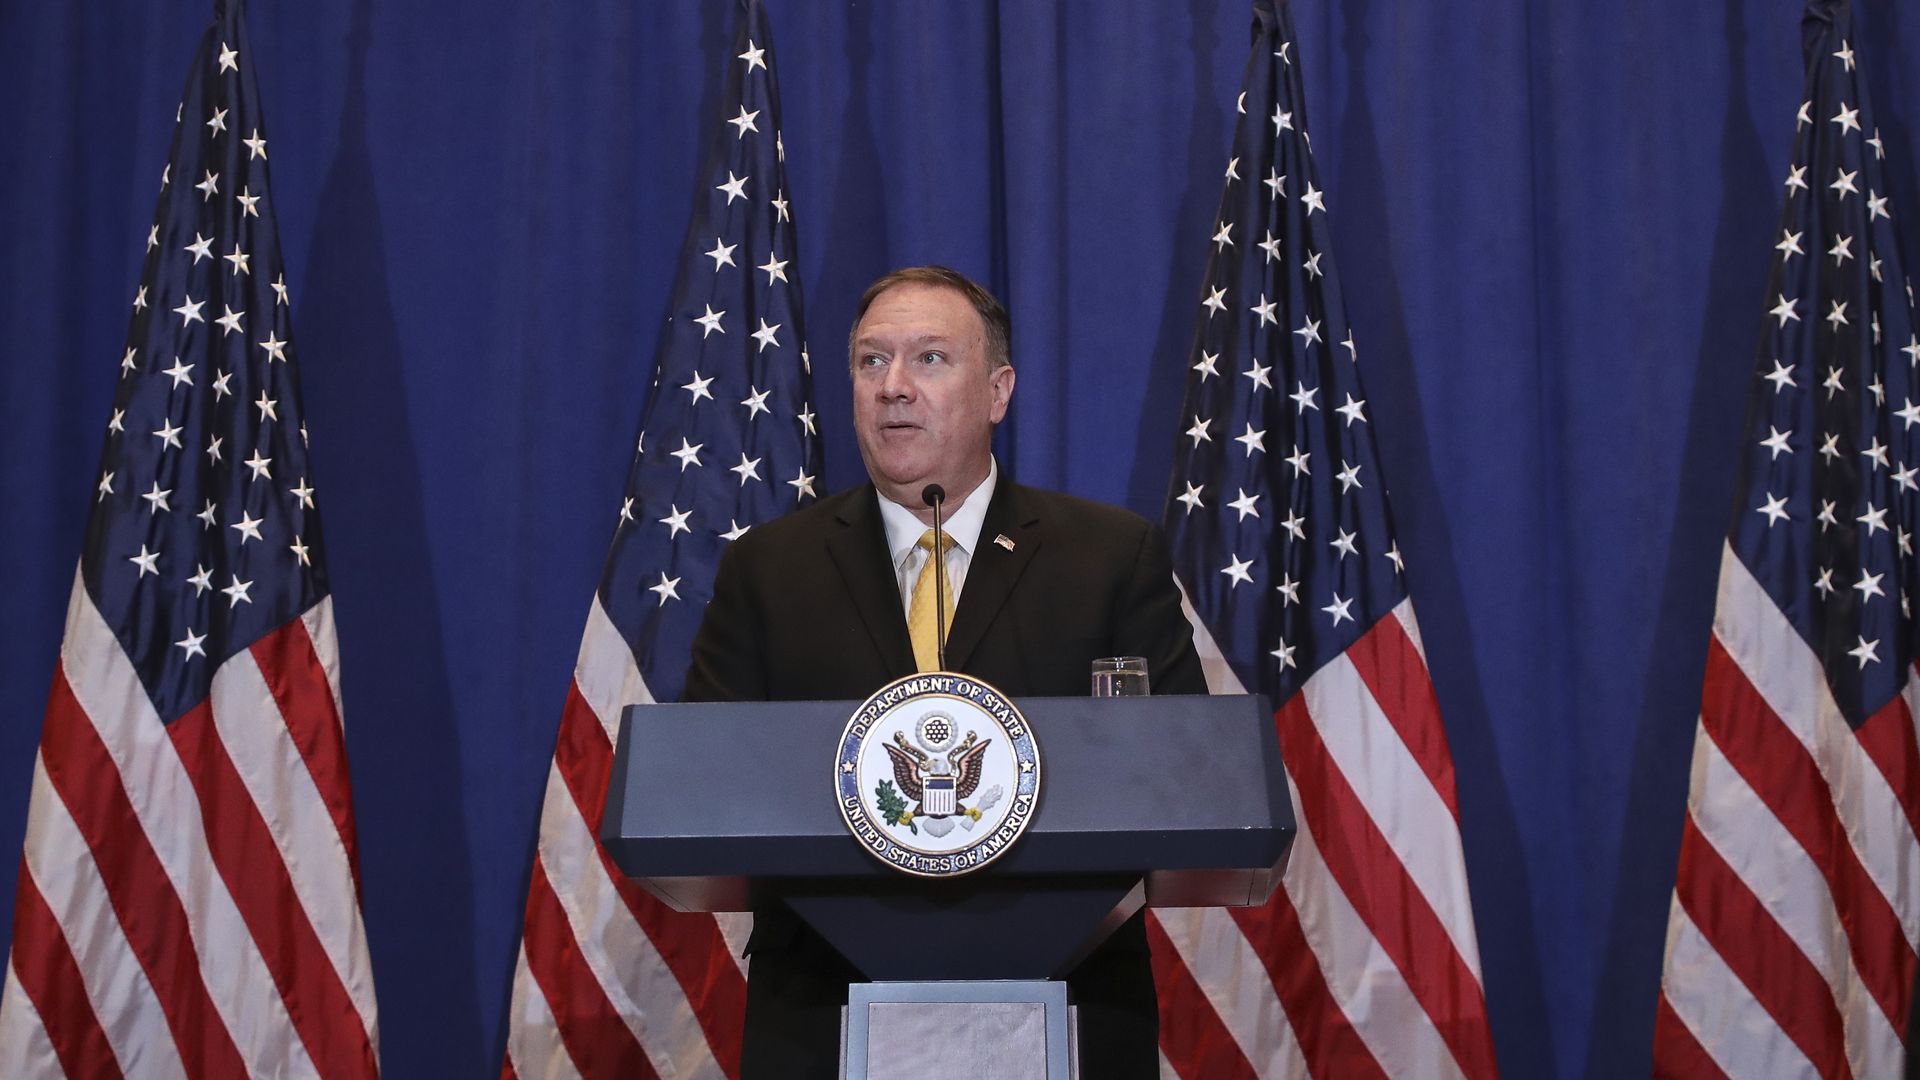 Secretary of State Mike Pompeo speaks during a press conference on the sidelines of the United Nations General Assembly on September 26